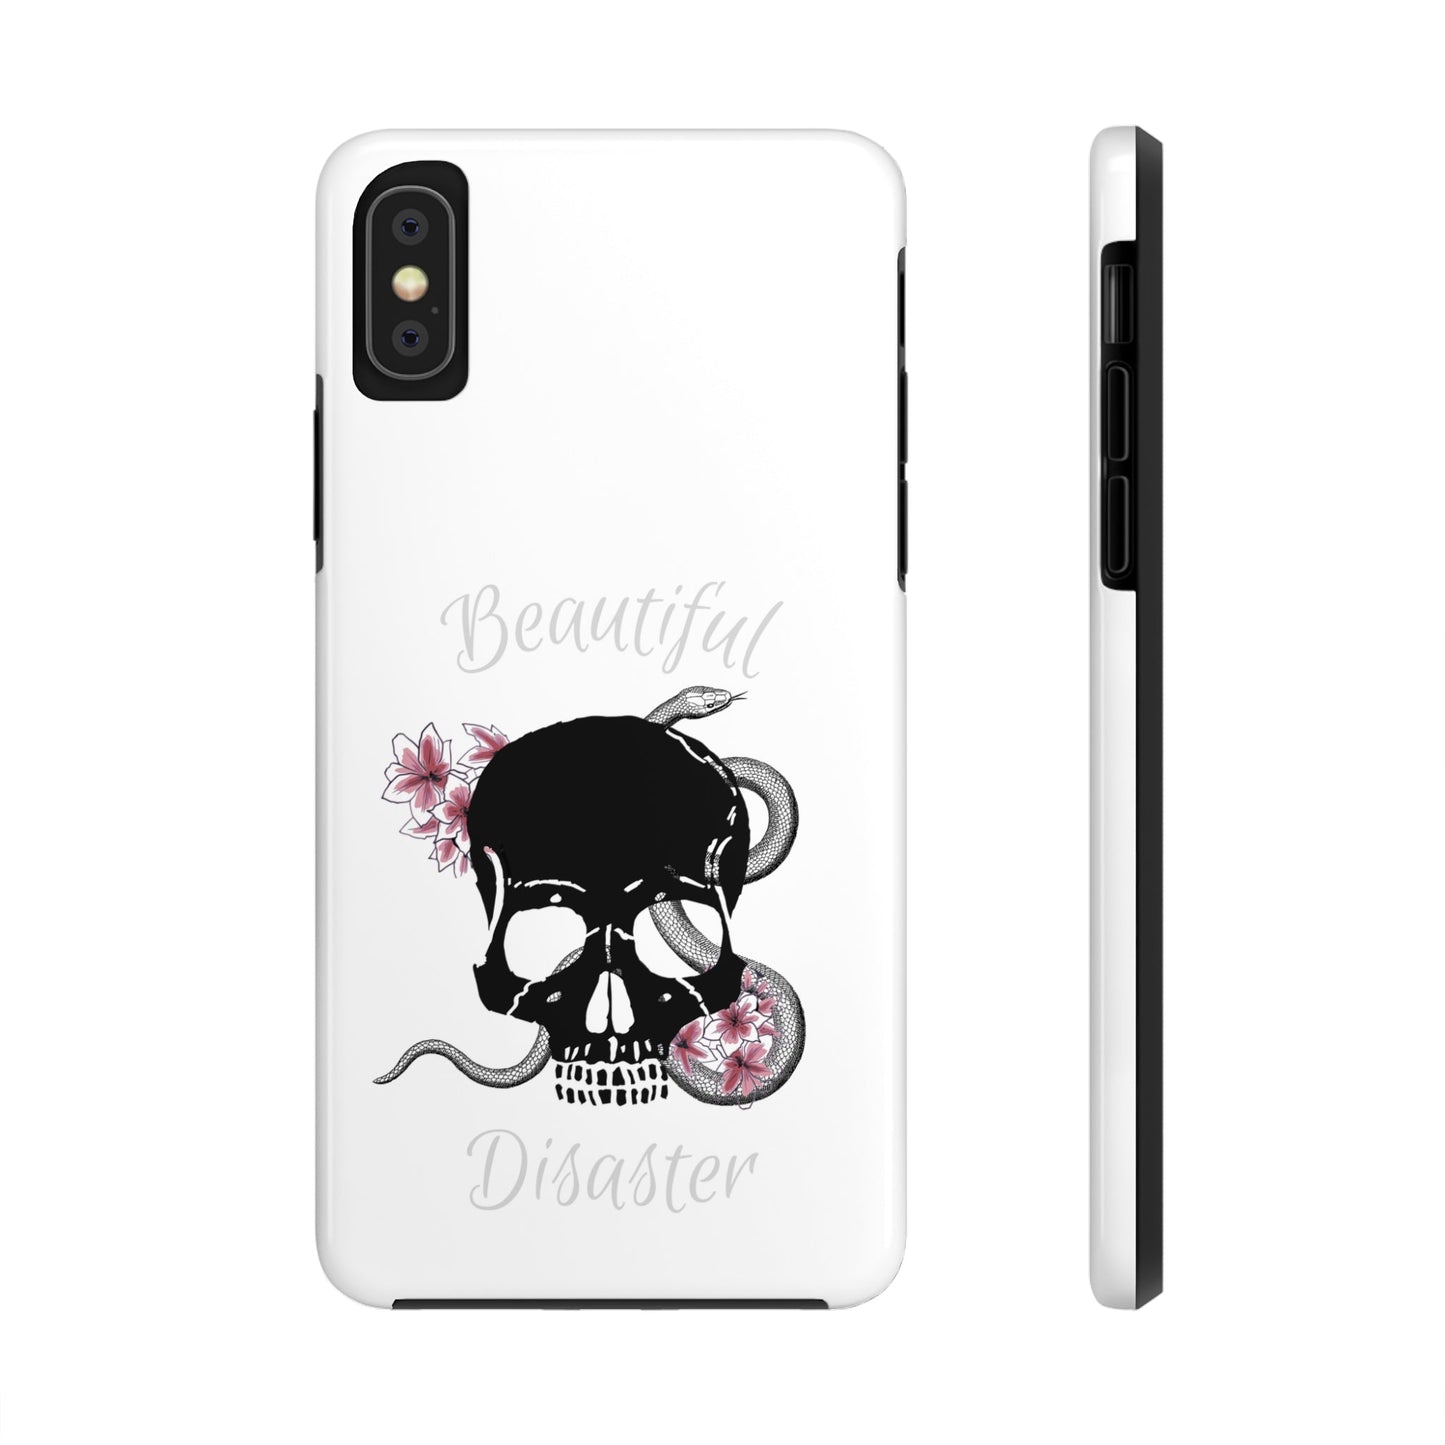 Beautiful Disaster Skull Rose Snake Tough Phone Cases iPhone 7, 8, X, 11, 12, 13, 14 & morePhone CaseVTZdesignsiPhone XSAccessoriesGlossyiPhone Cases